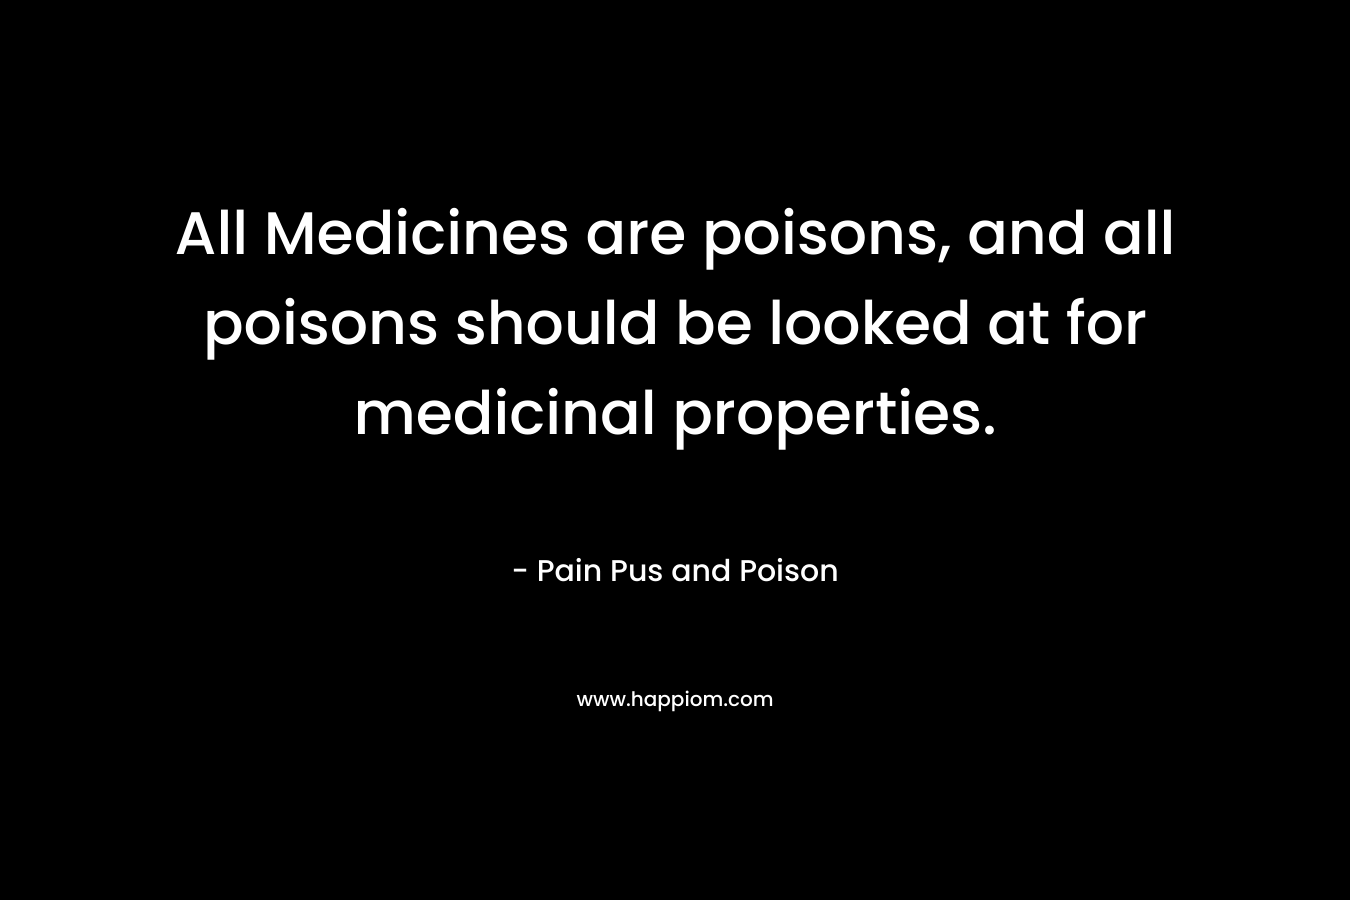 All Medicines are poisons, and all poisons should be looked at for medicinal properties. – Pain Pus and Poison